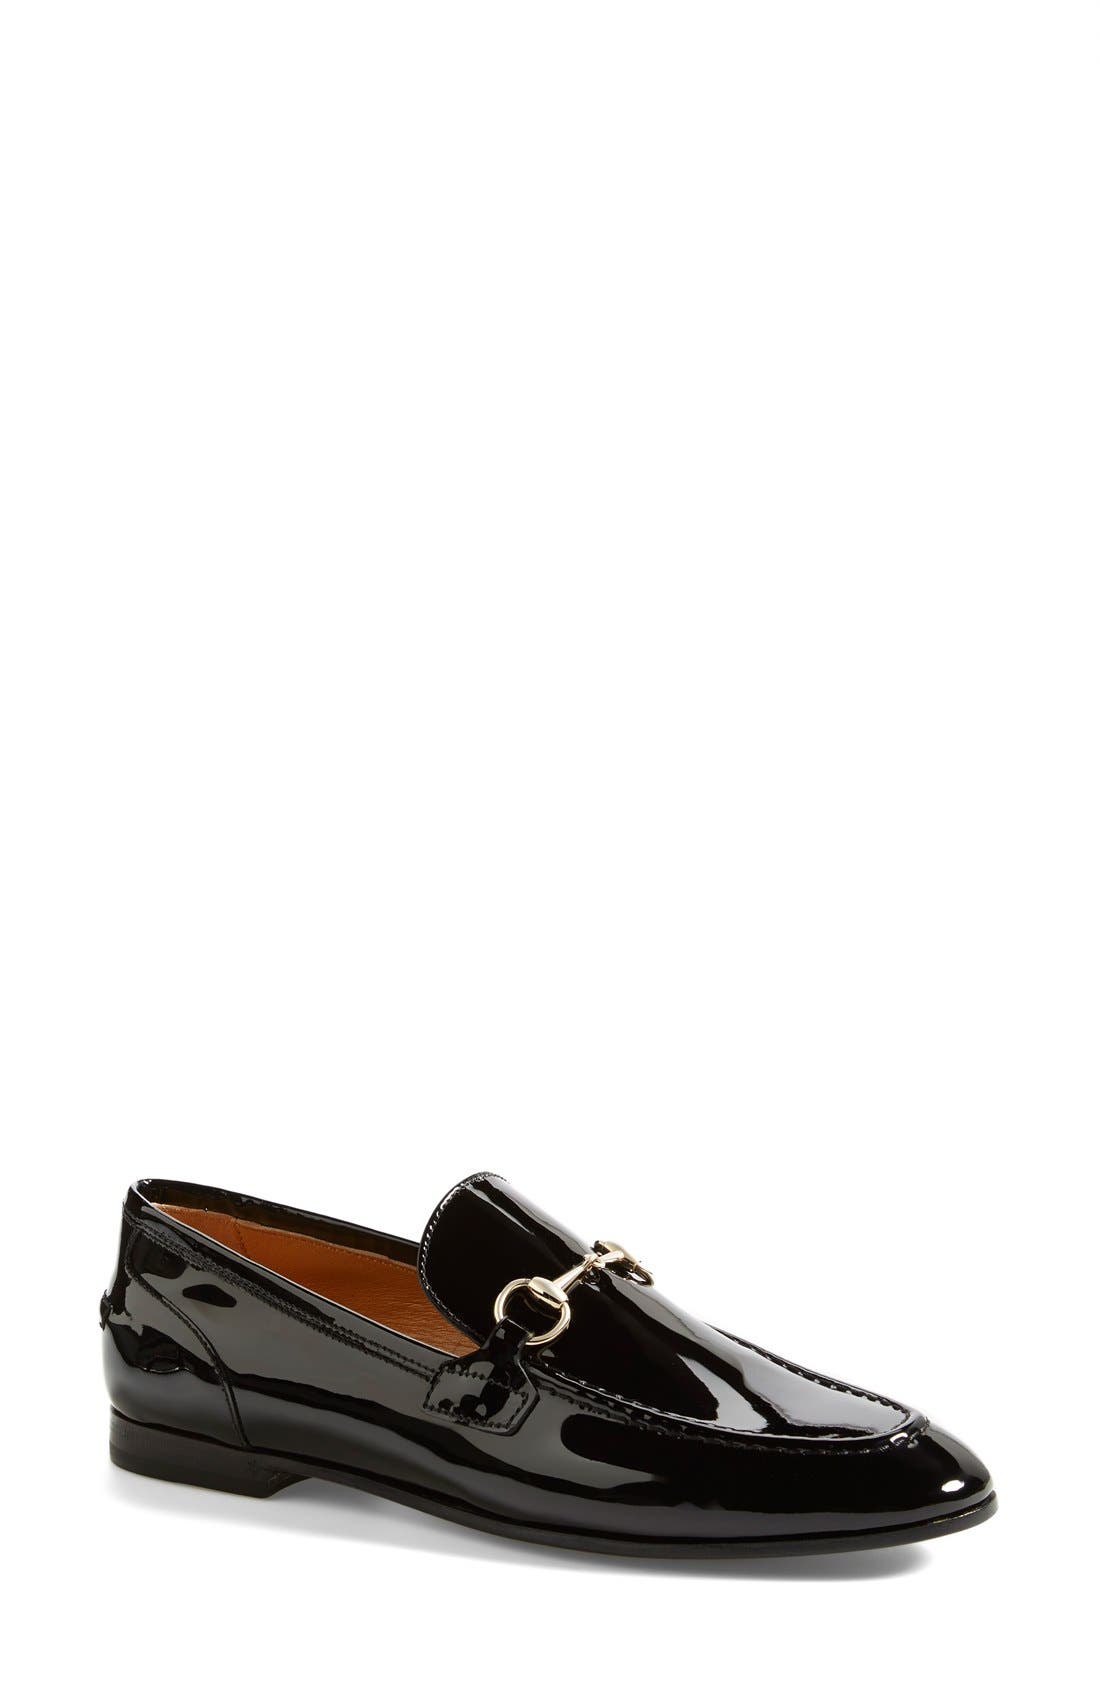 gucci loafers patent leather